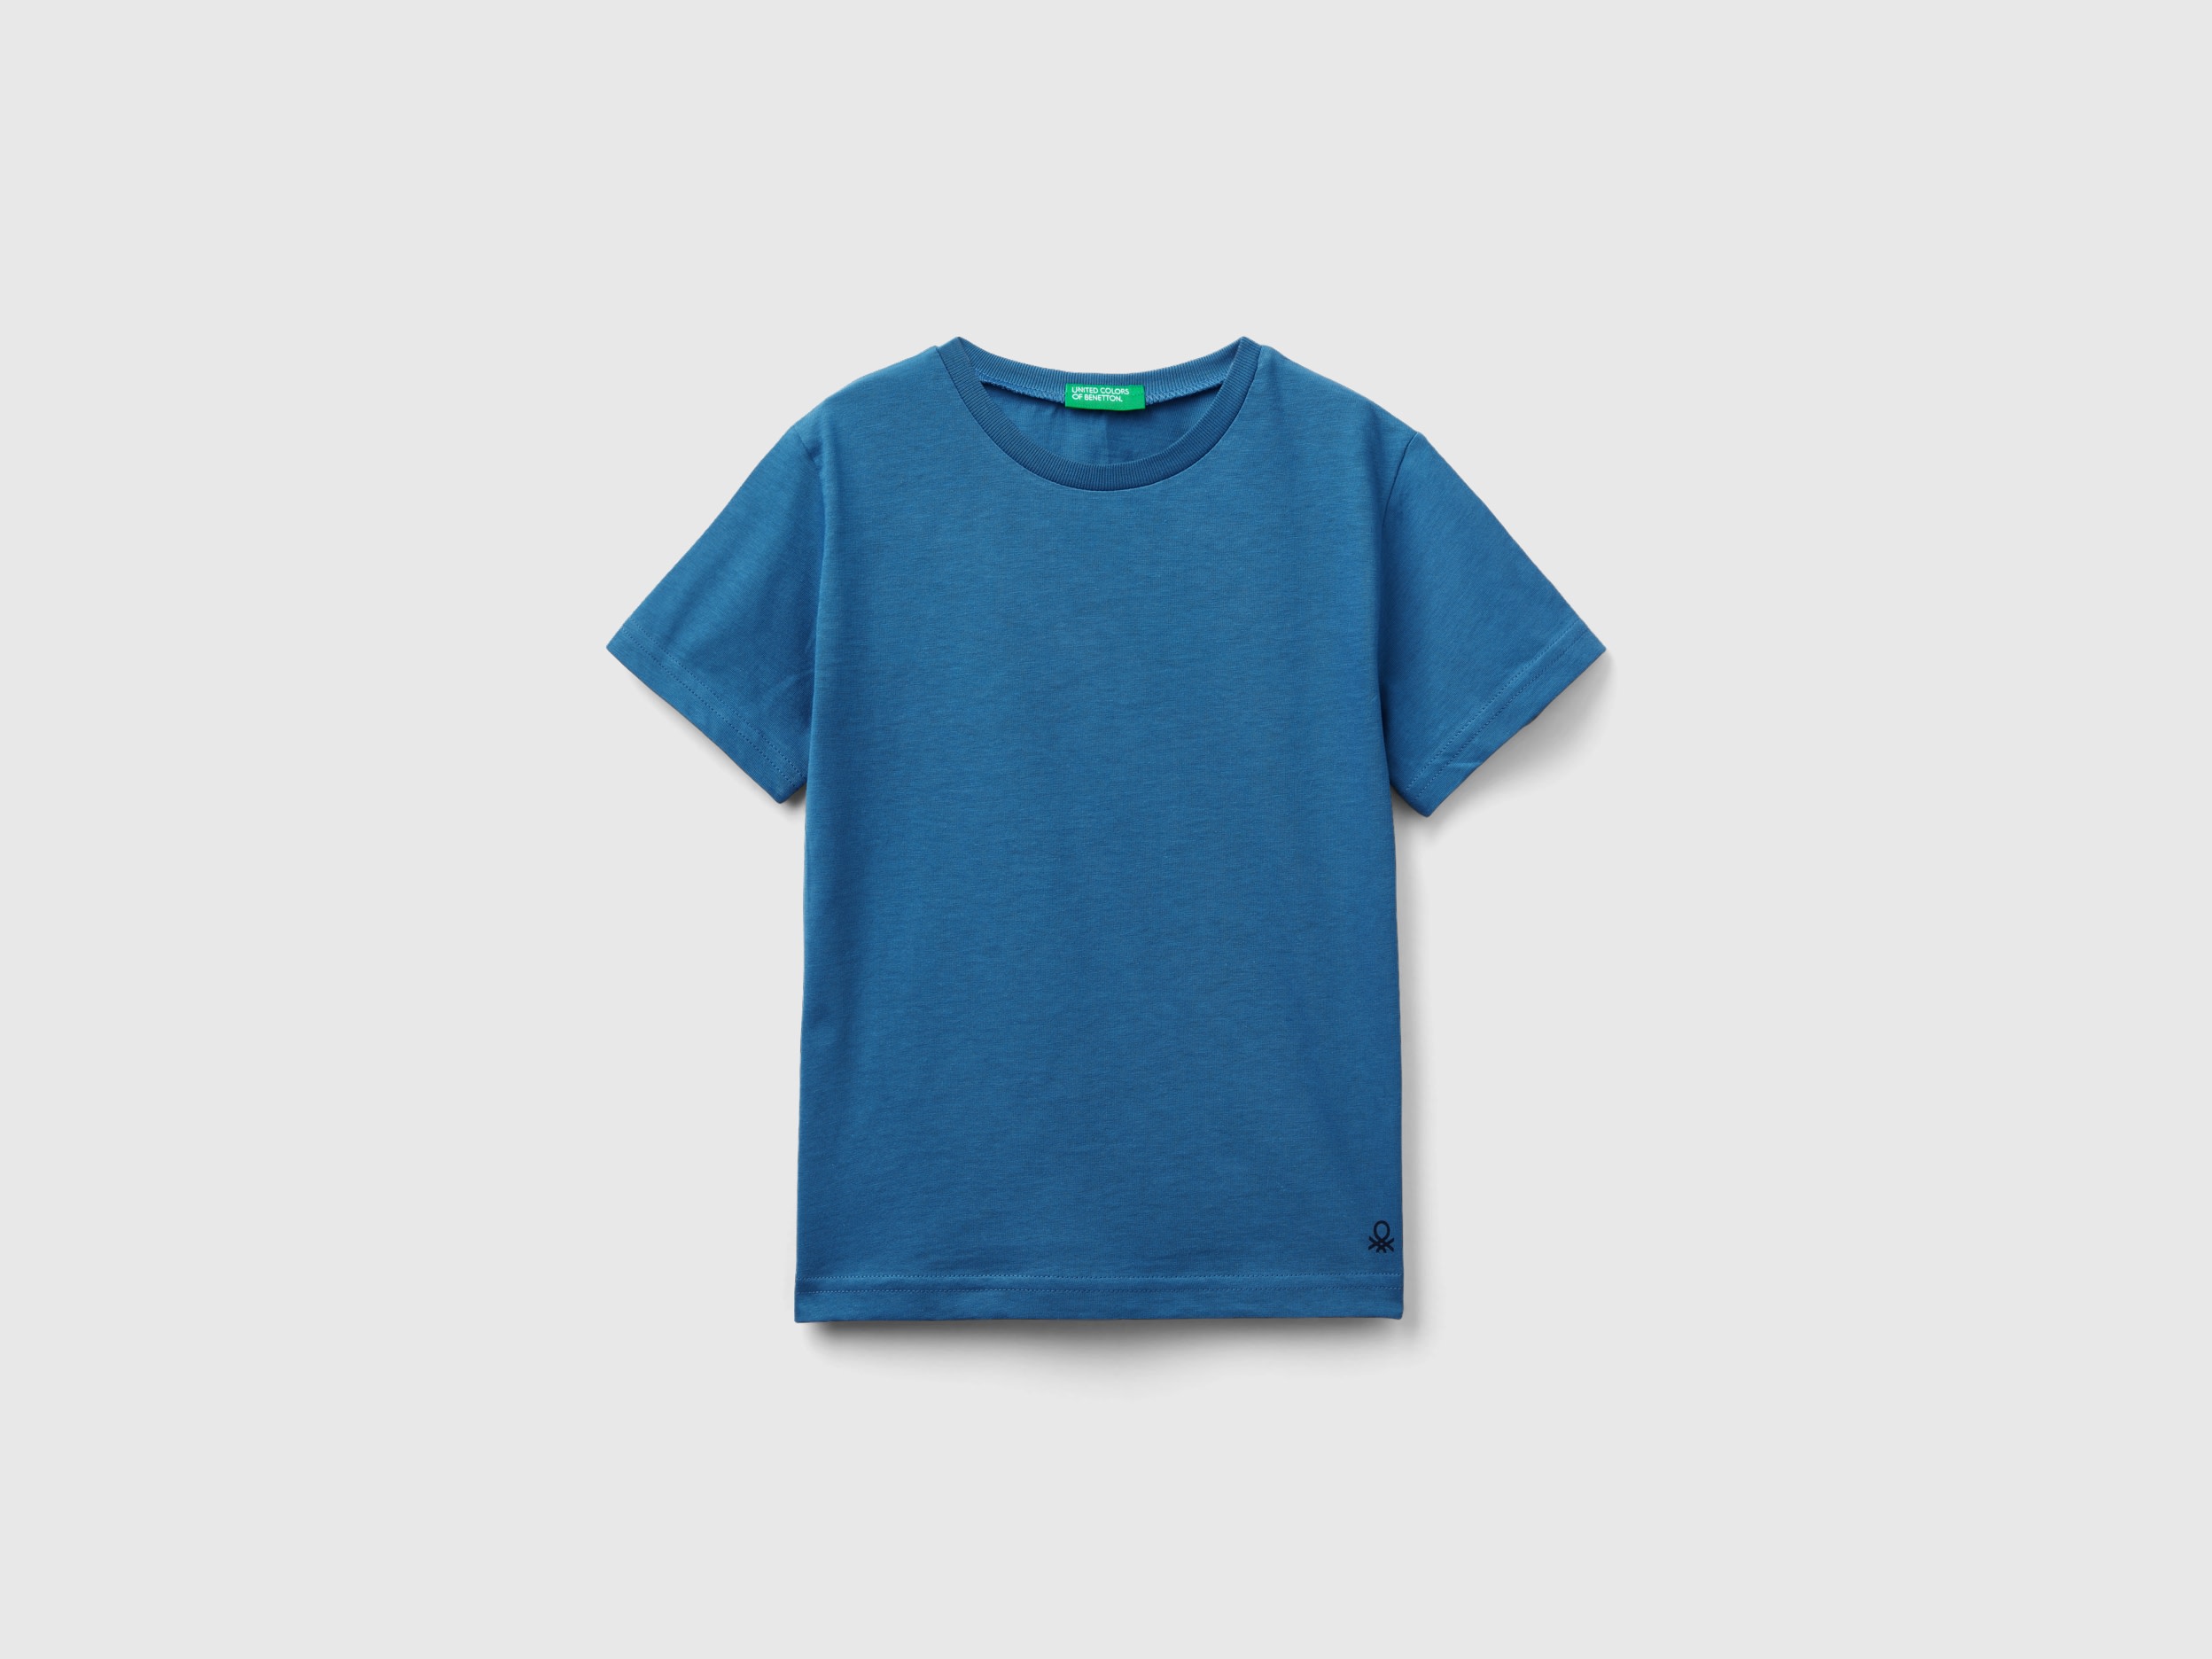 Image of Benetton, T-shirt In Organic Cotton, size 110, Blue, Kids